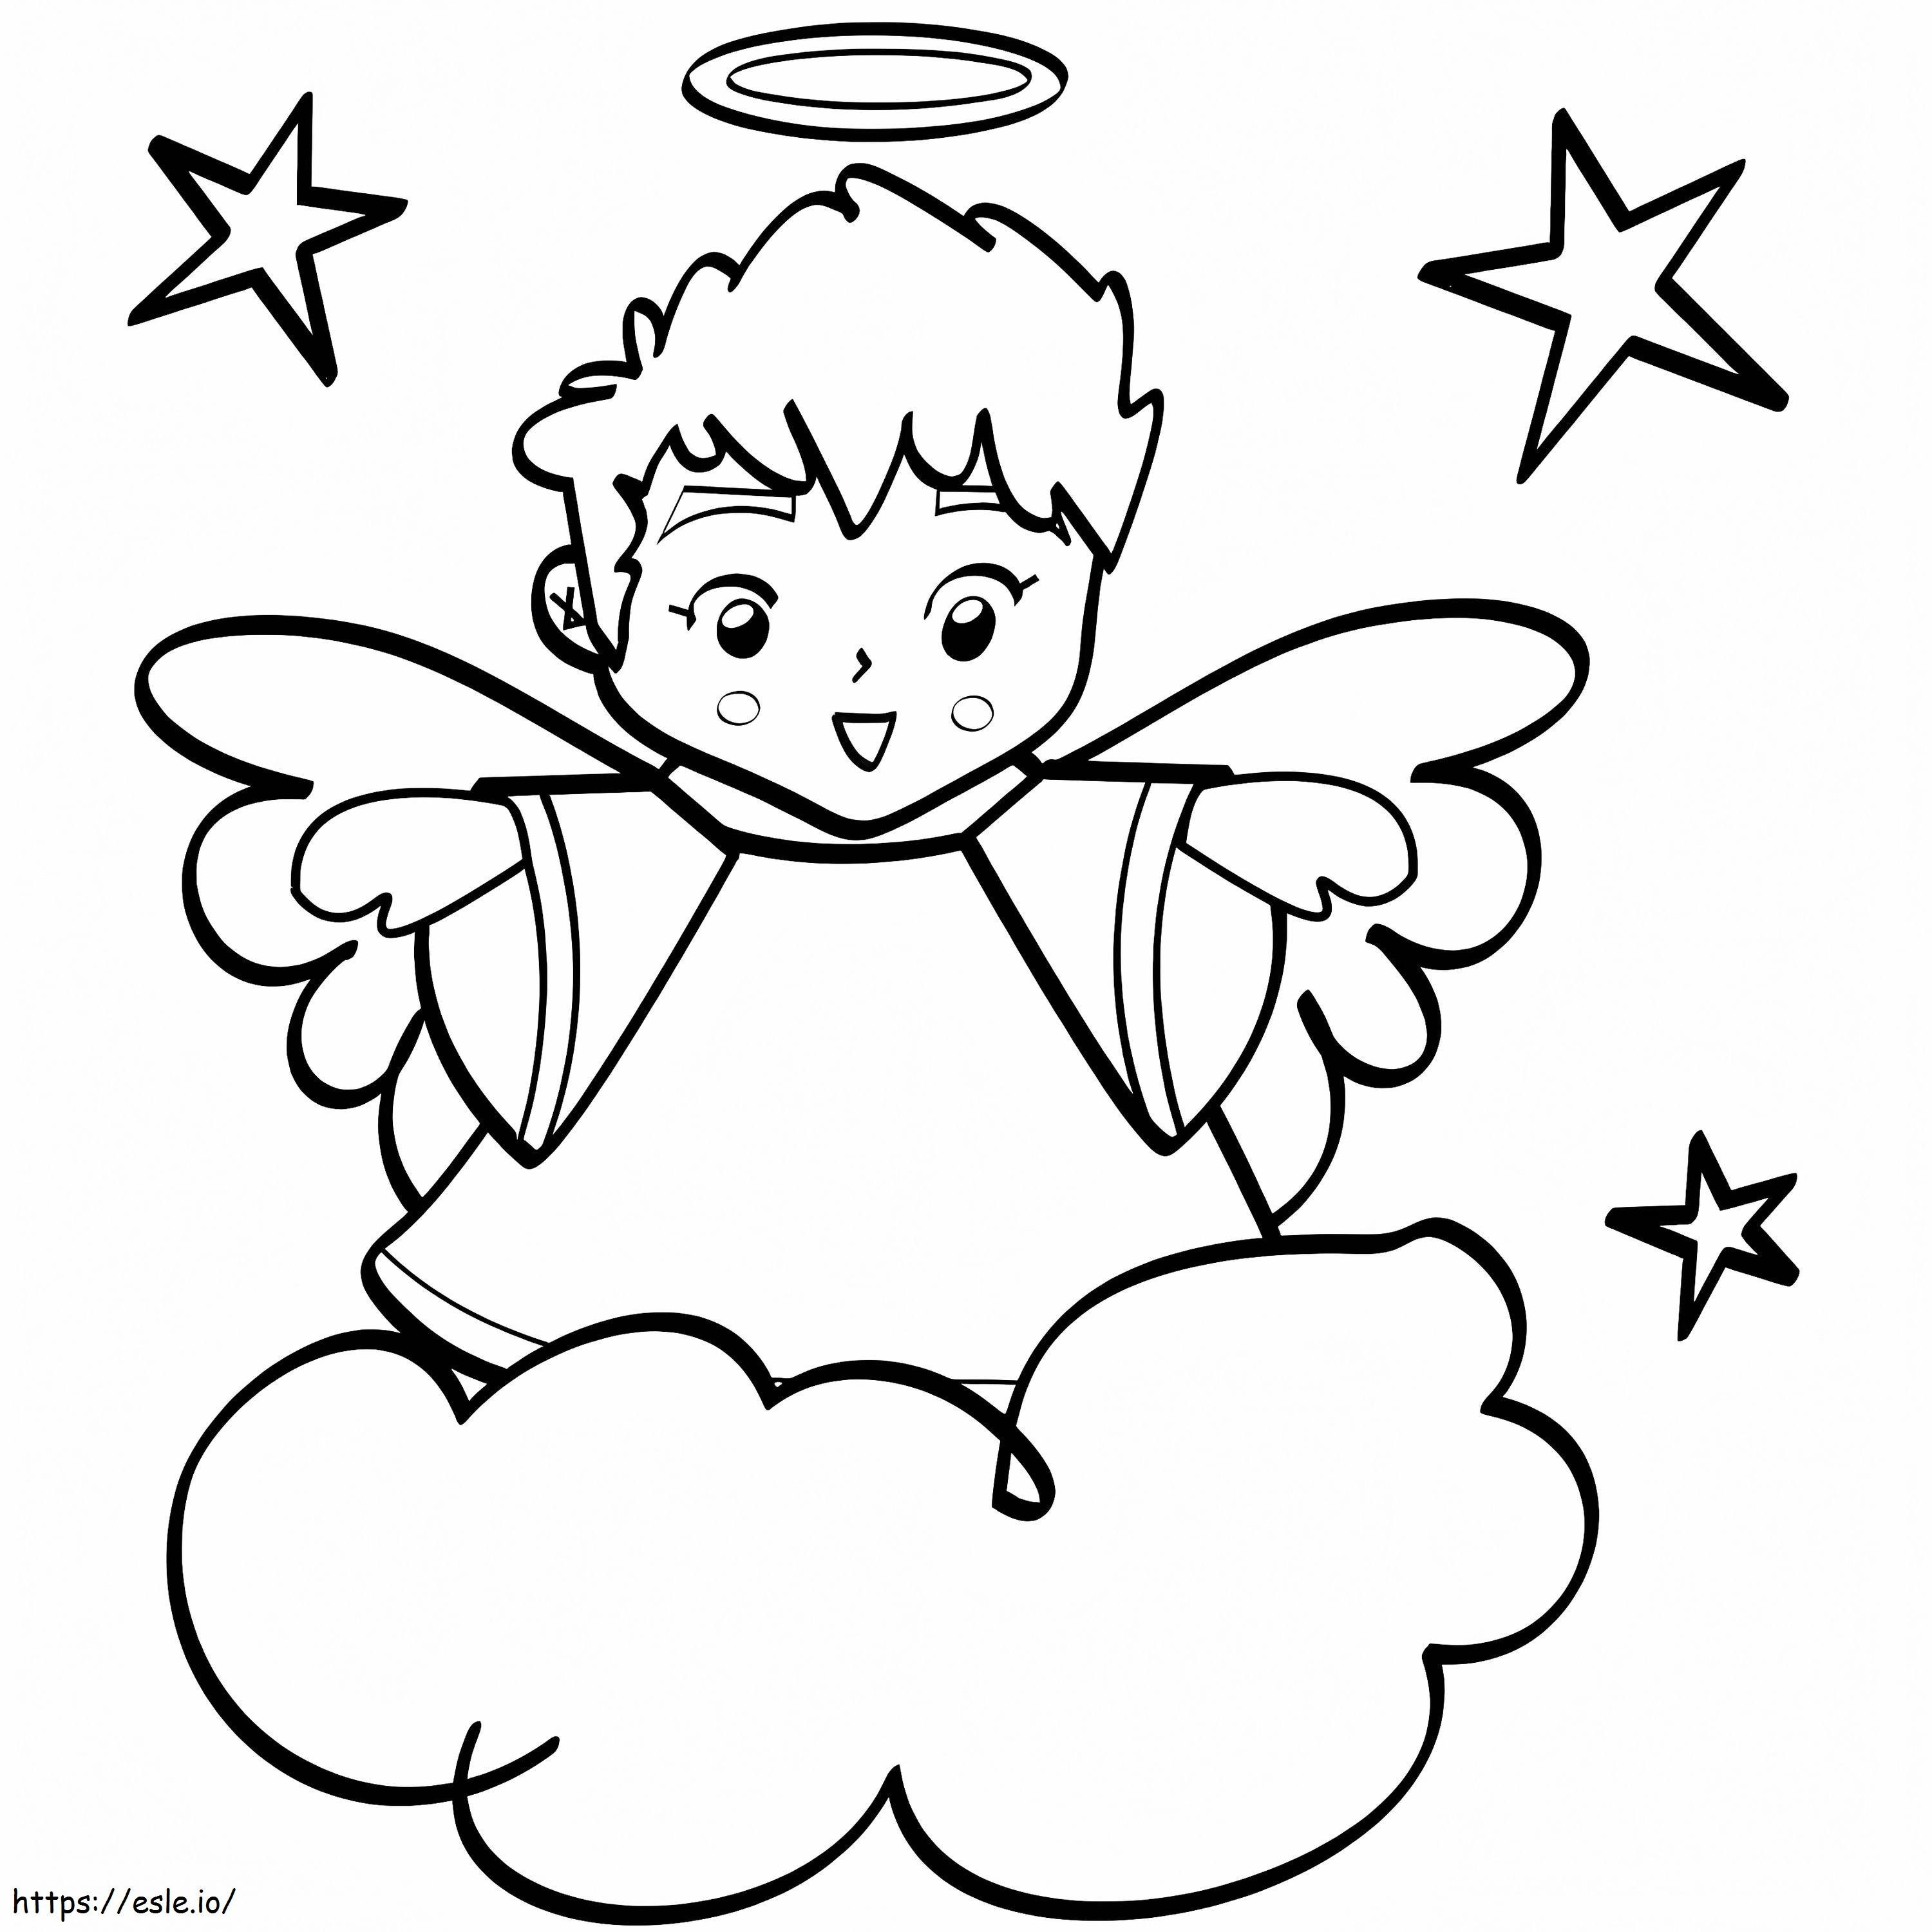 Angel In The Cloud coloring page